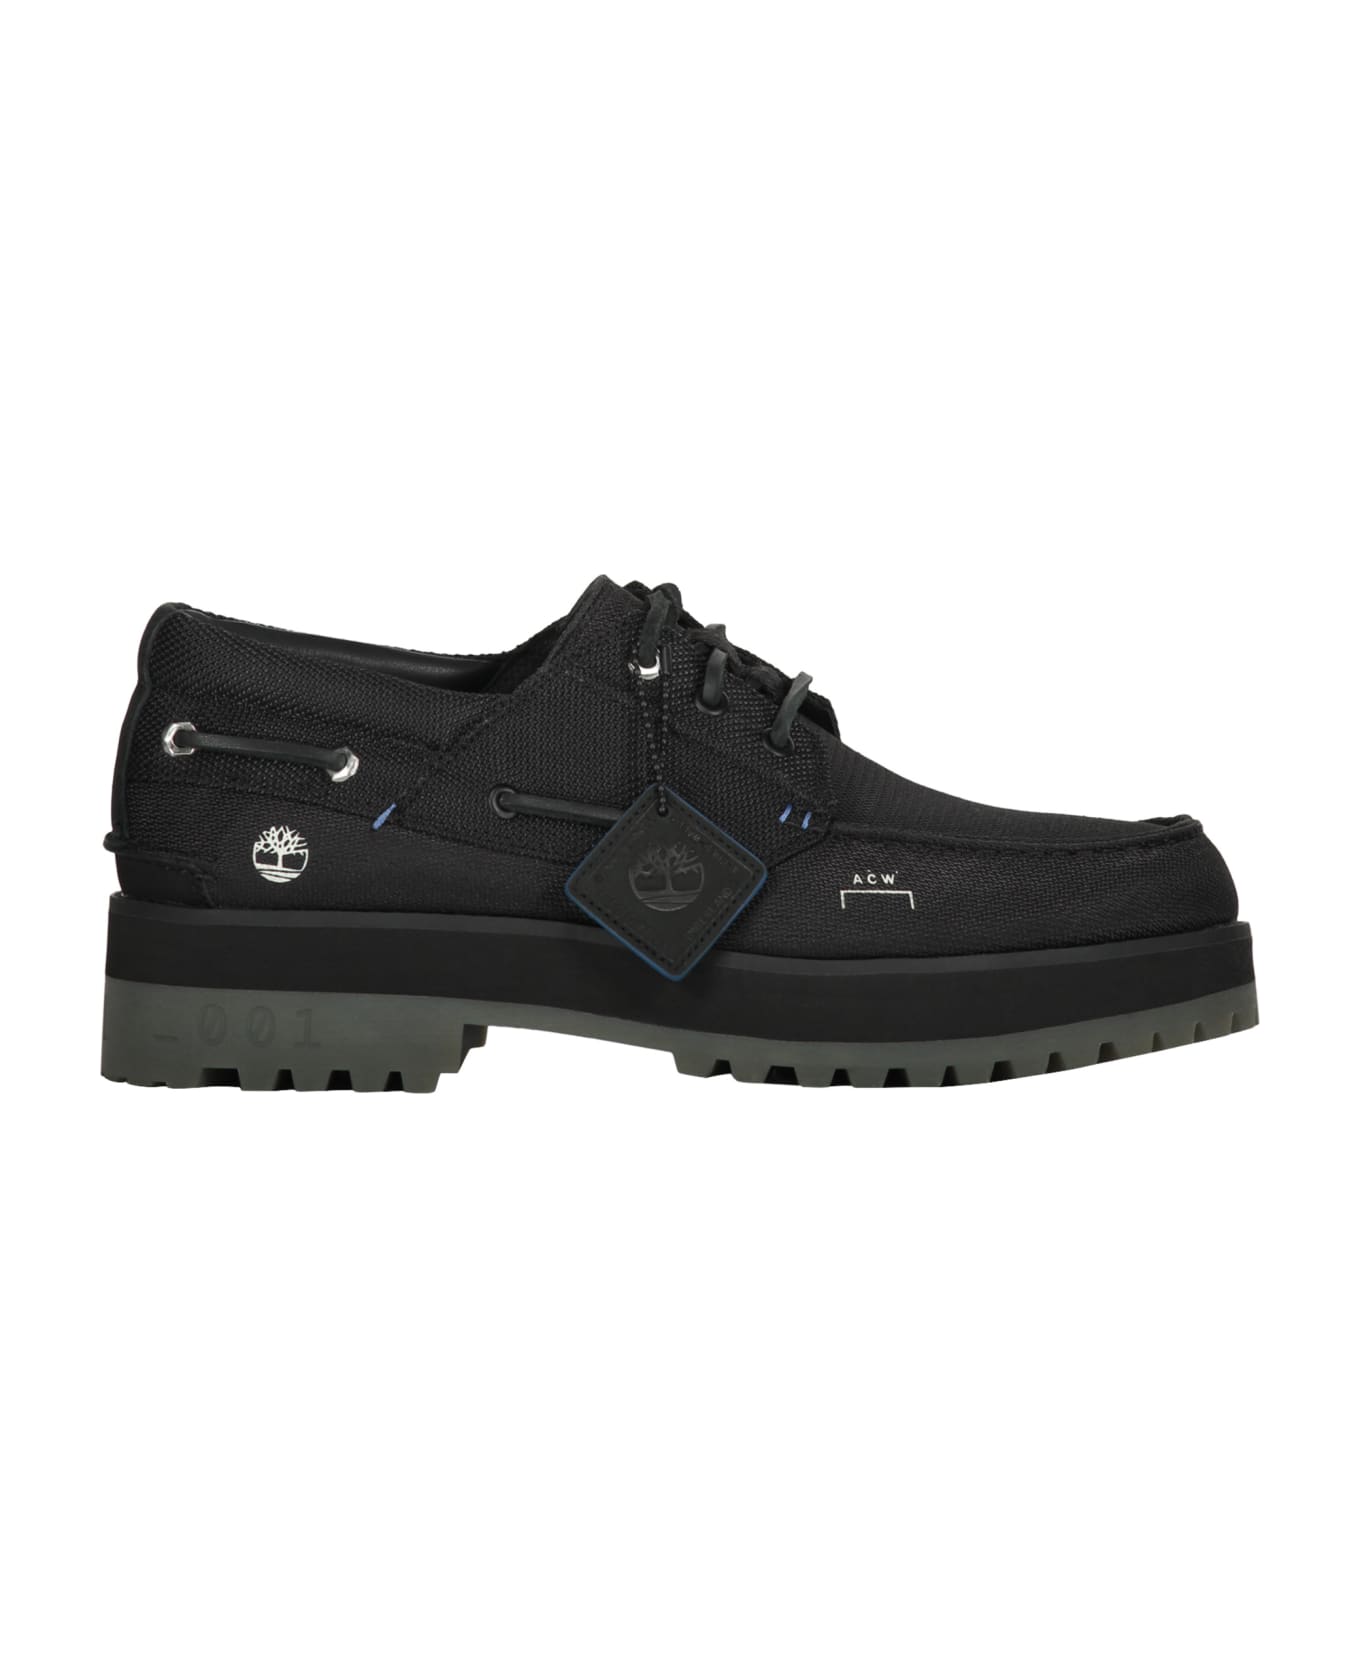 A-COLD-WALL Timberland X A-cold-wall* Boat Shoes - black